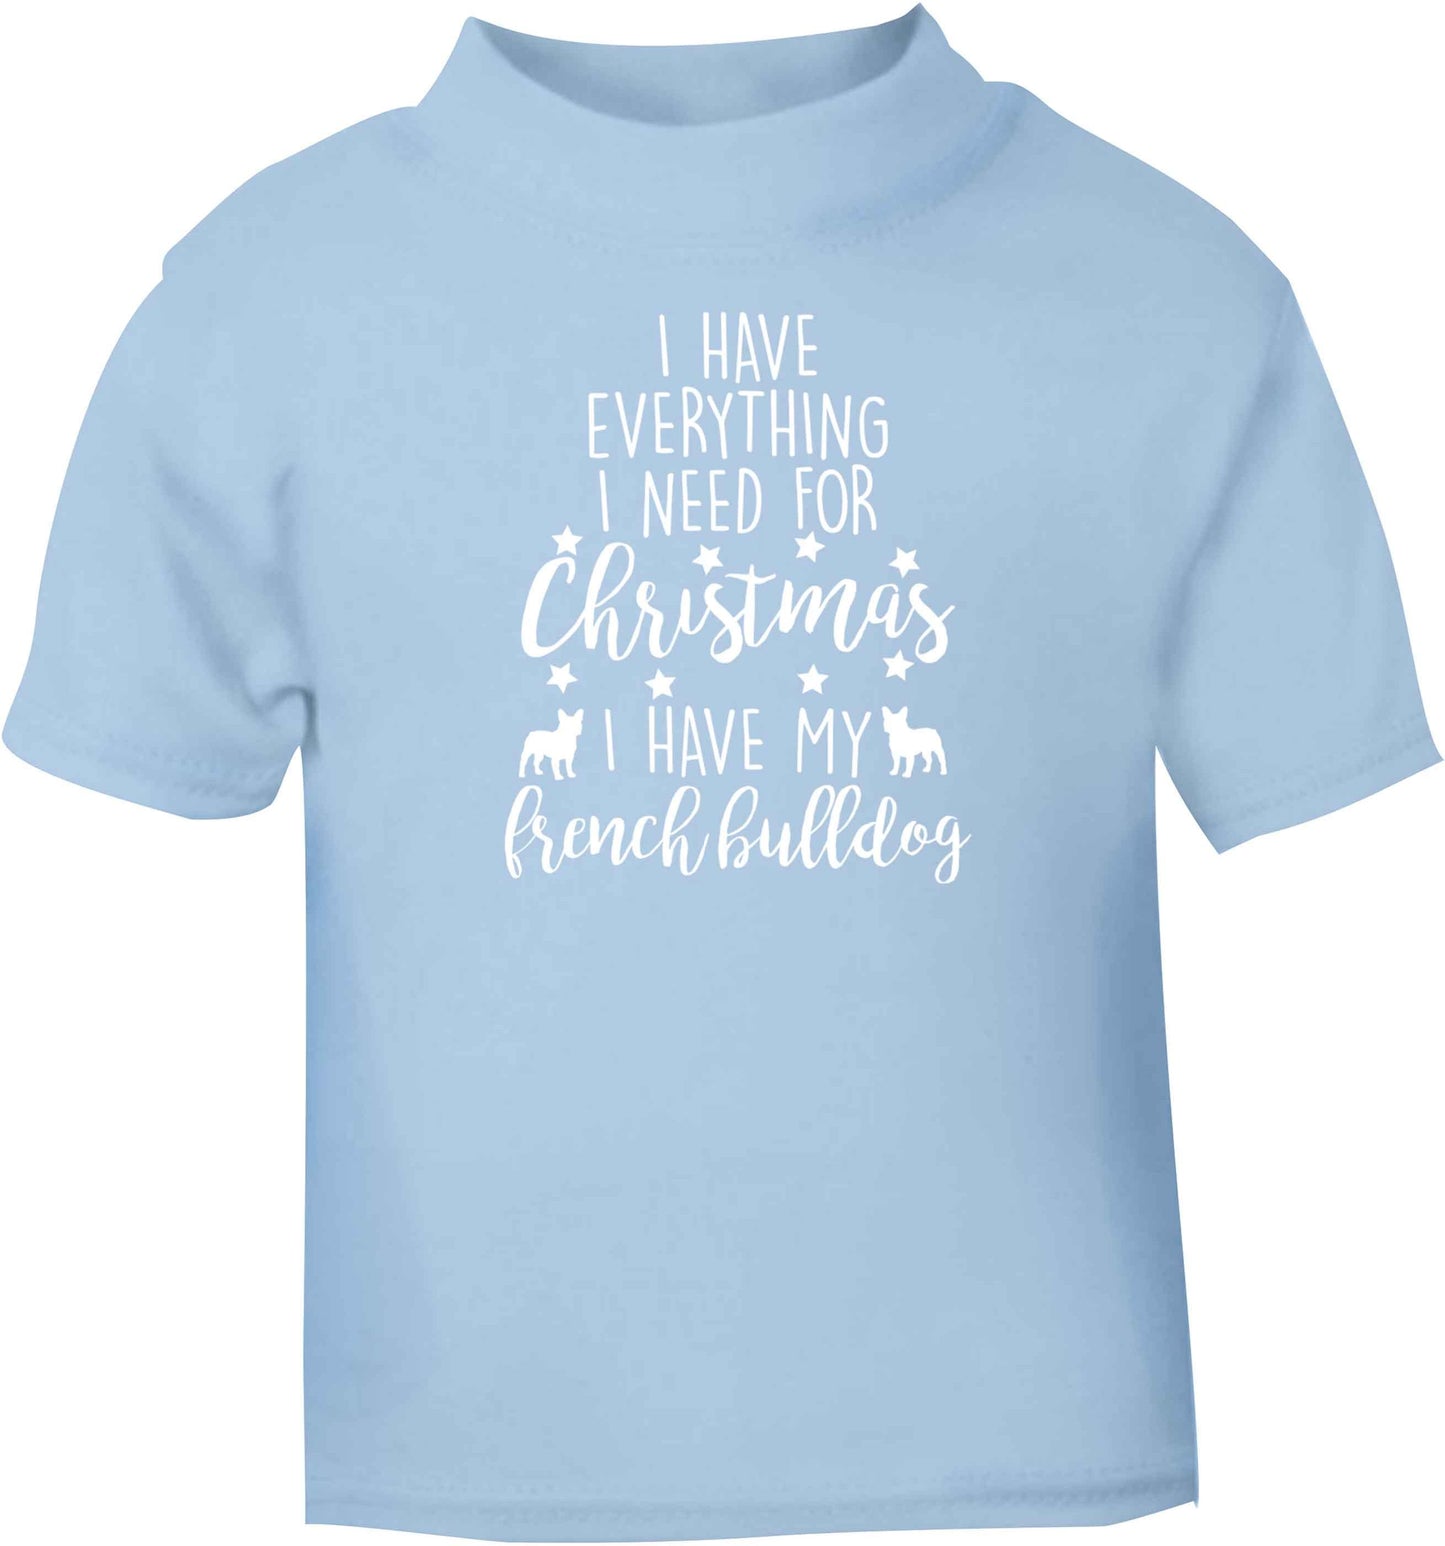 I have everything I need for Christmas I have my french bulldog light blue baby toddler Tshirt 2 Years